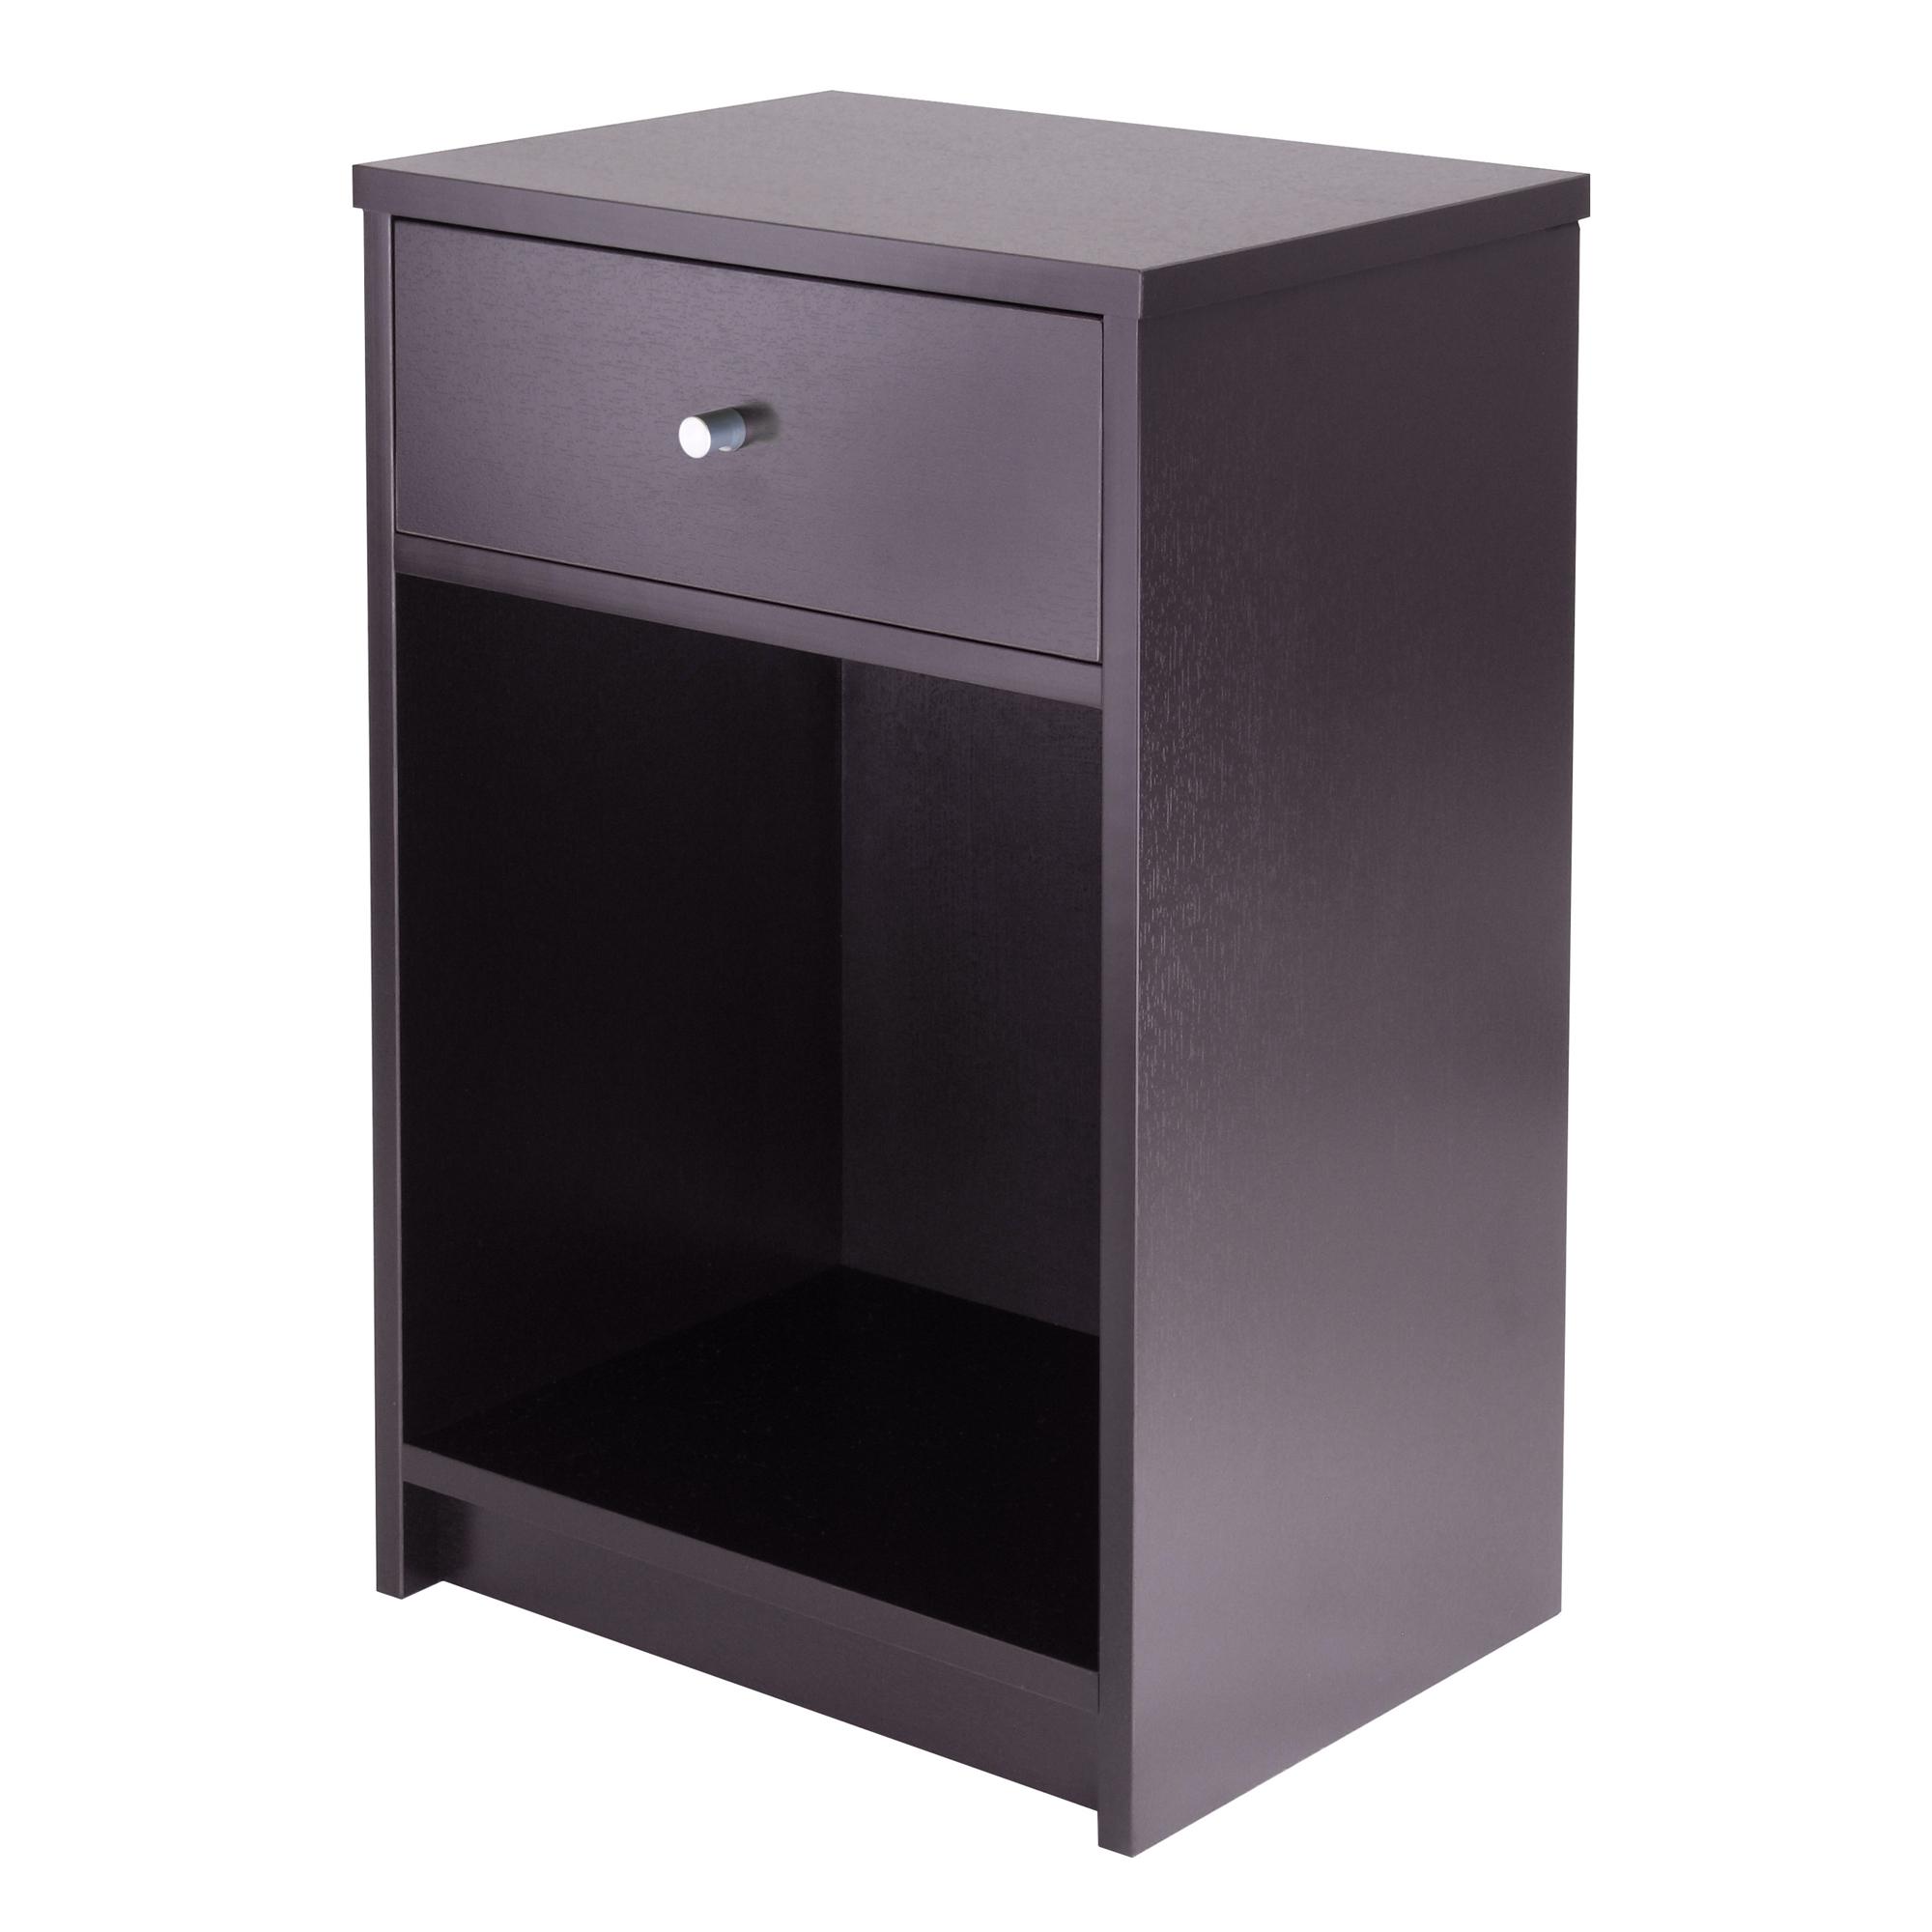 winsome squamish accent table with drawer black small storage view larger total furniture round glass nightstand changing dresser drop leaf dinette sets huge patio umbrellas white